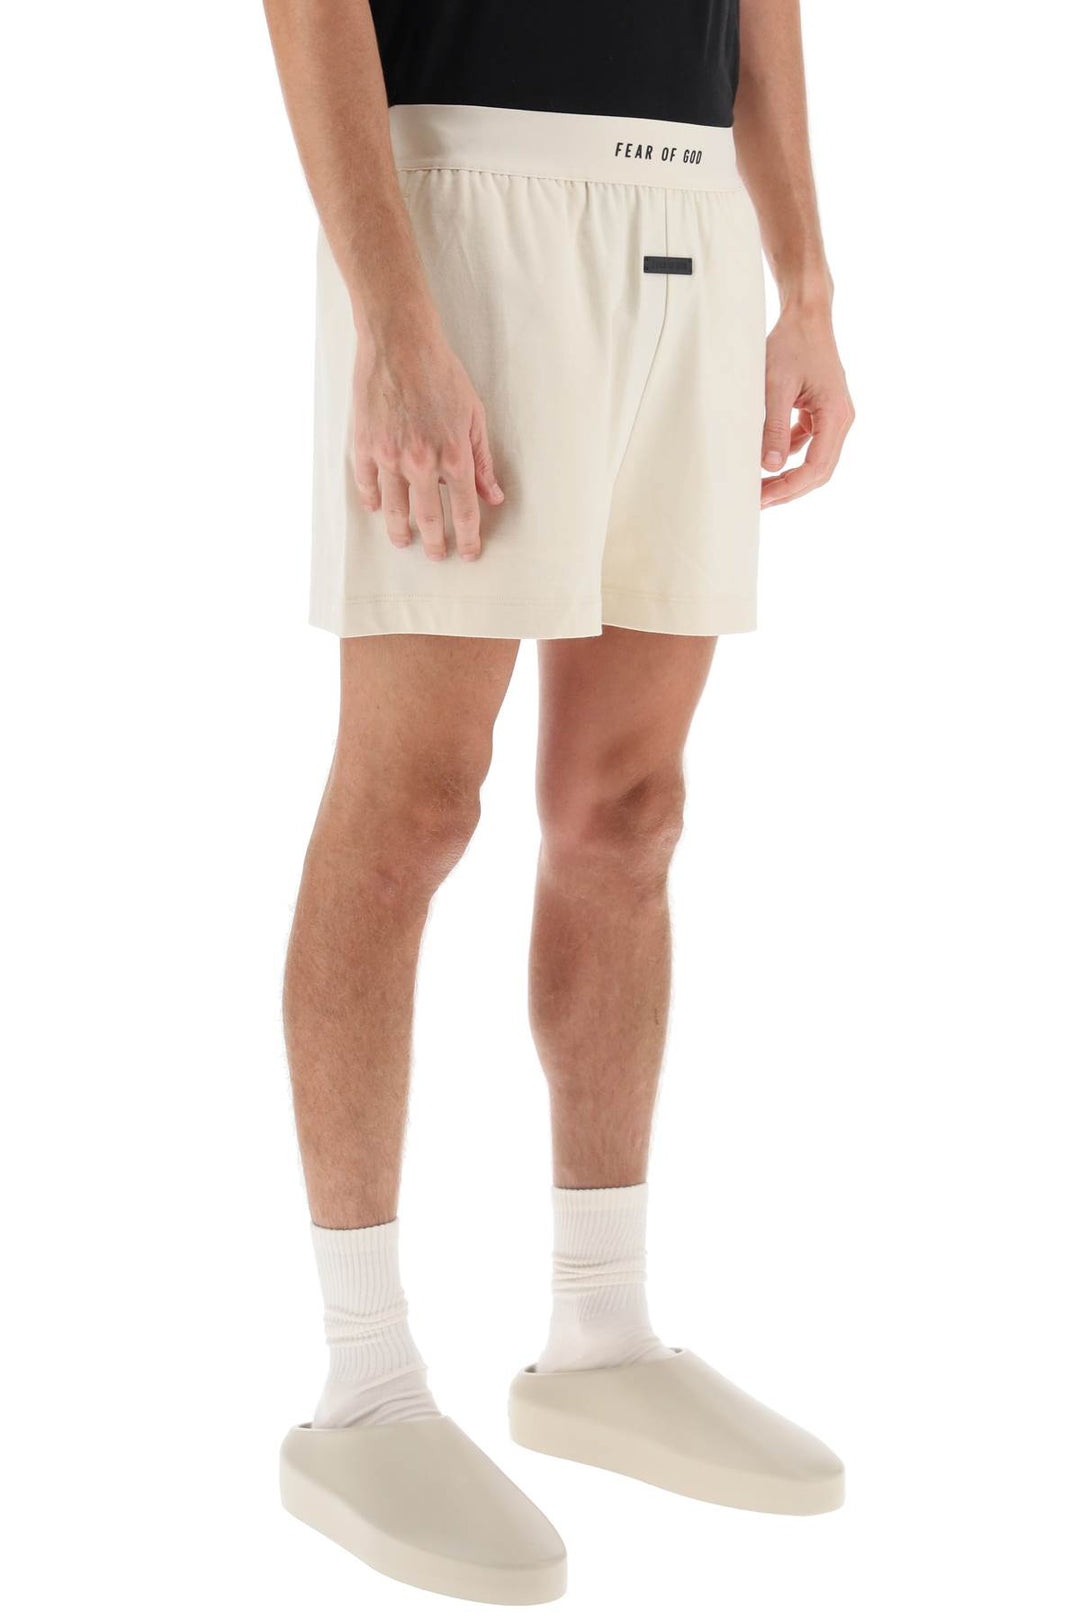 Fear of god the lounge boxer short-1